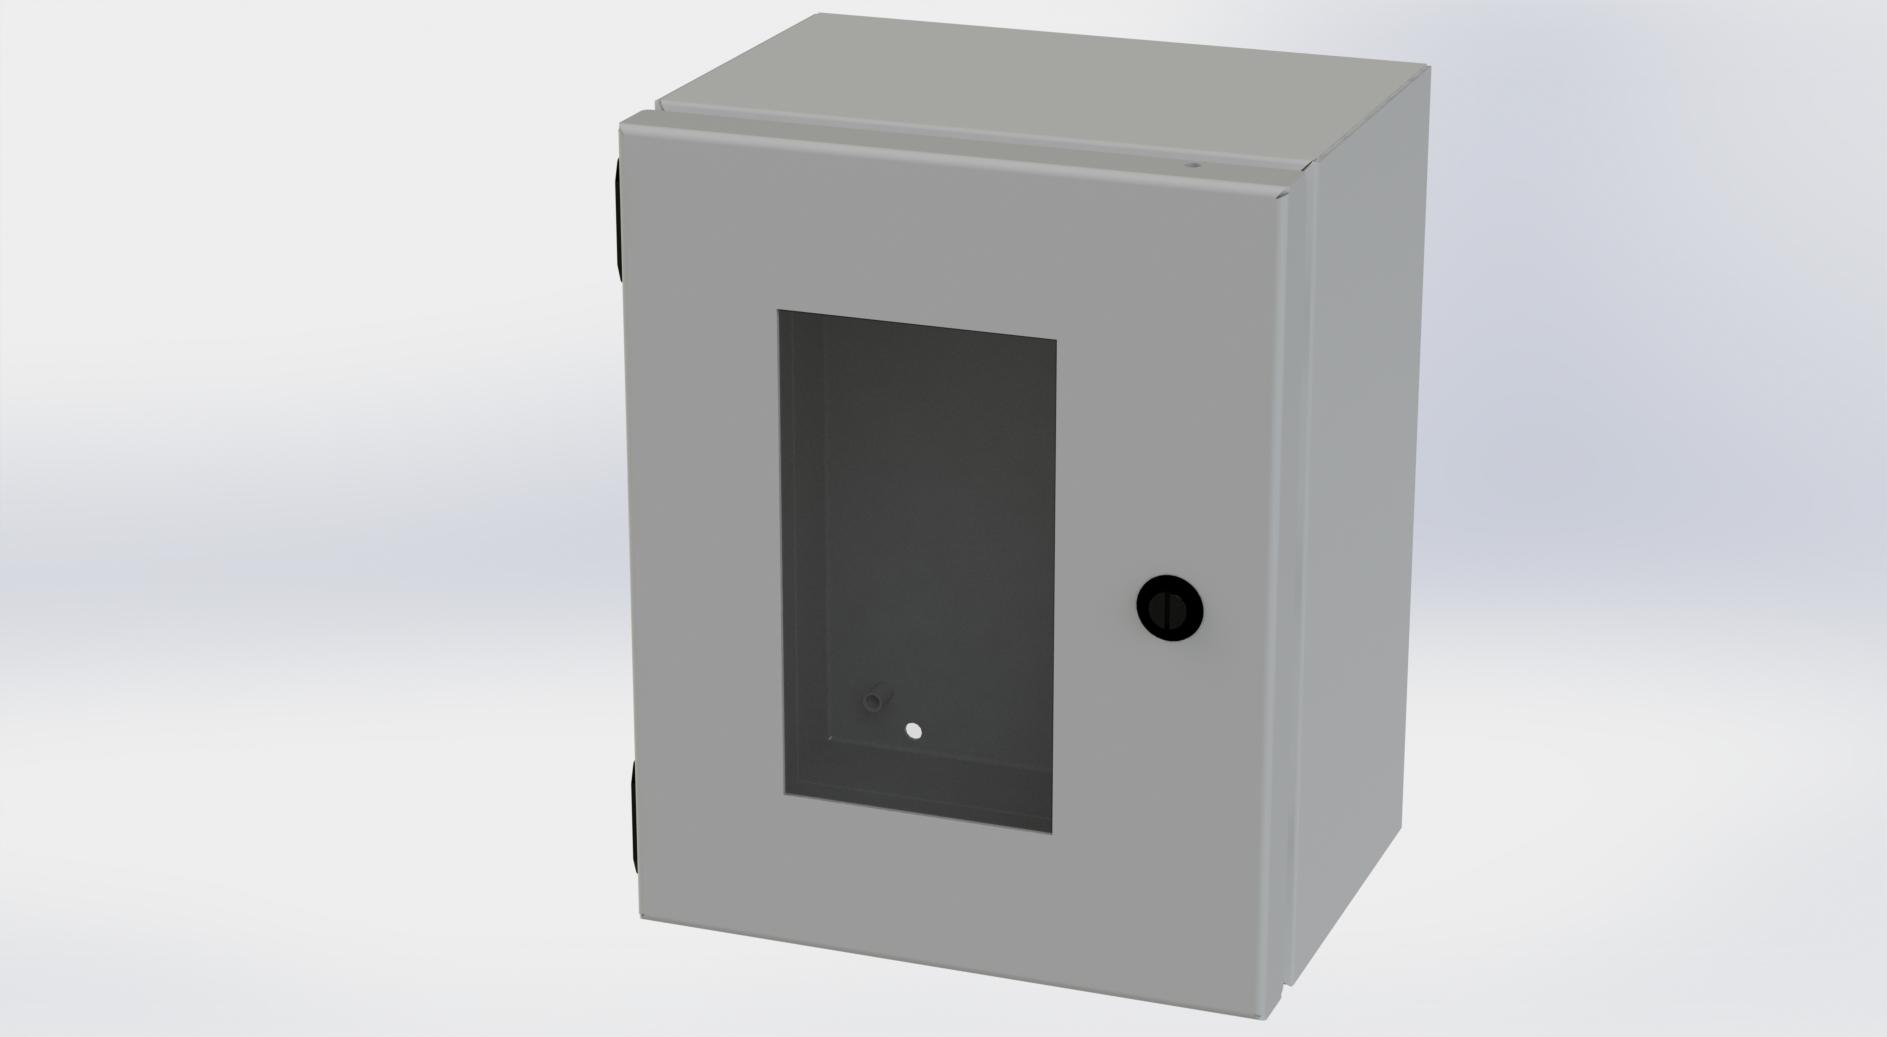 Saginaw Control SCE-10086ELJW ELJ Enclosure W/Viewing Window, Height:10.00", Width:8.00", Depth:6.00", ANSI-61 gray powder coating inside and out. Optional sub-panels are powder coated white.